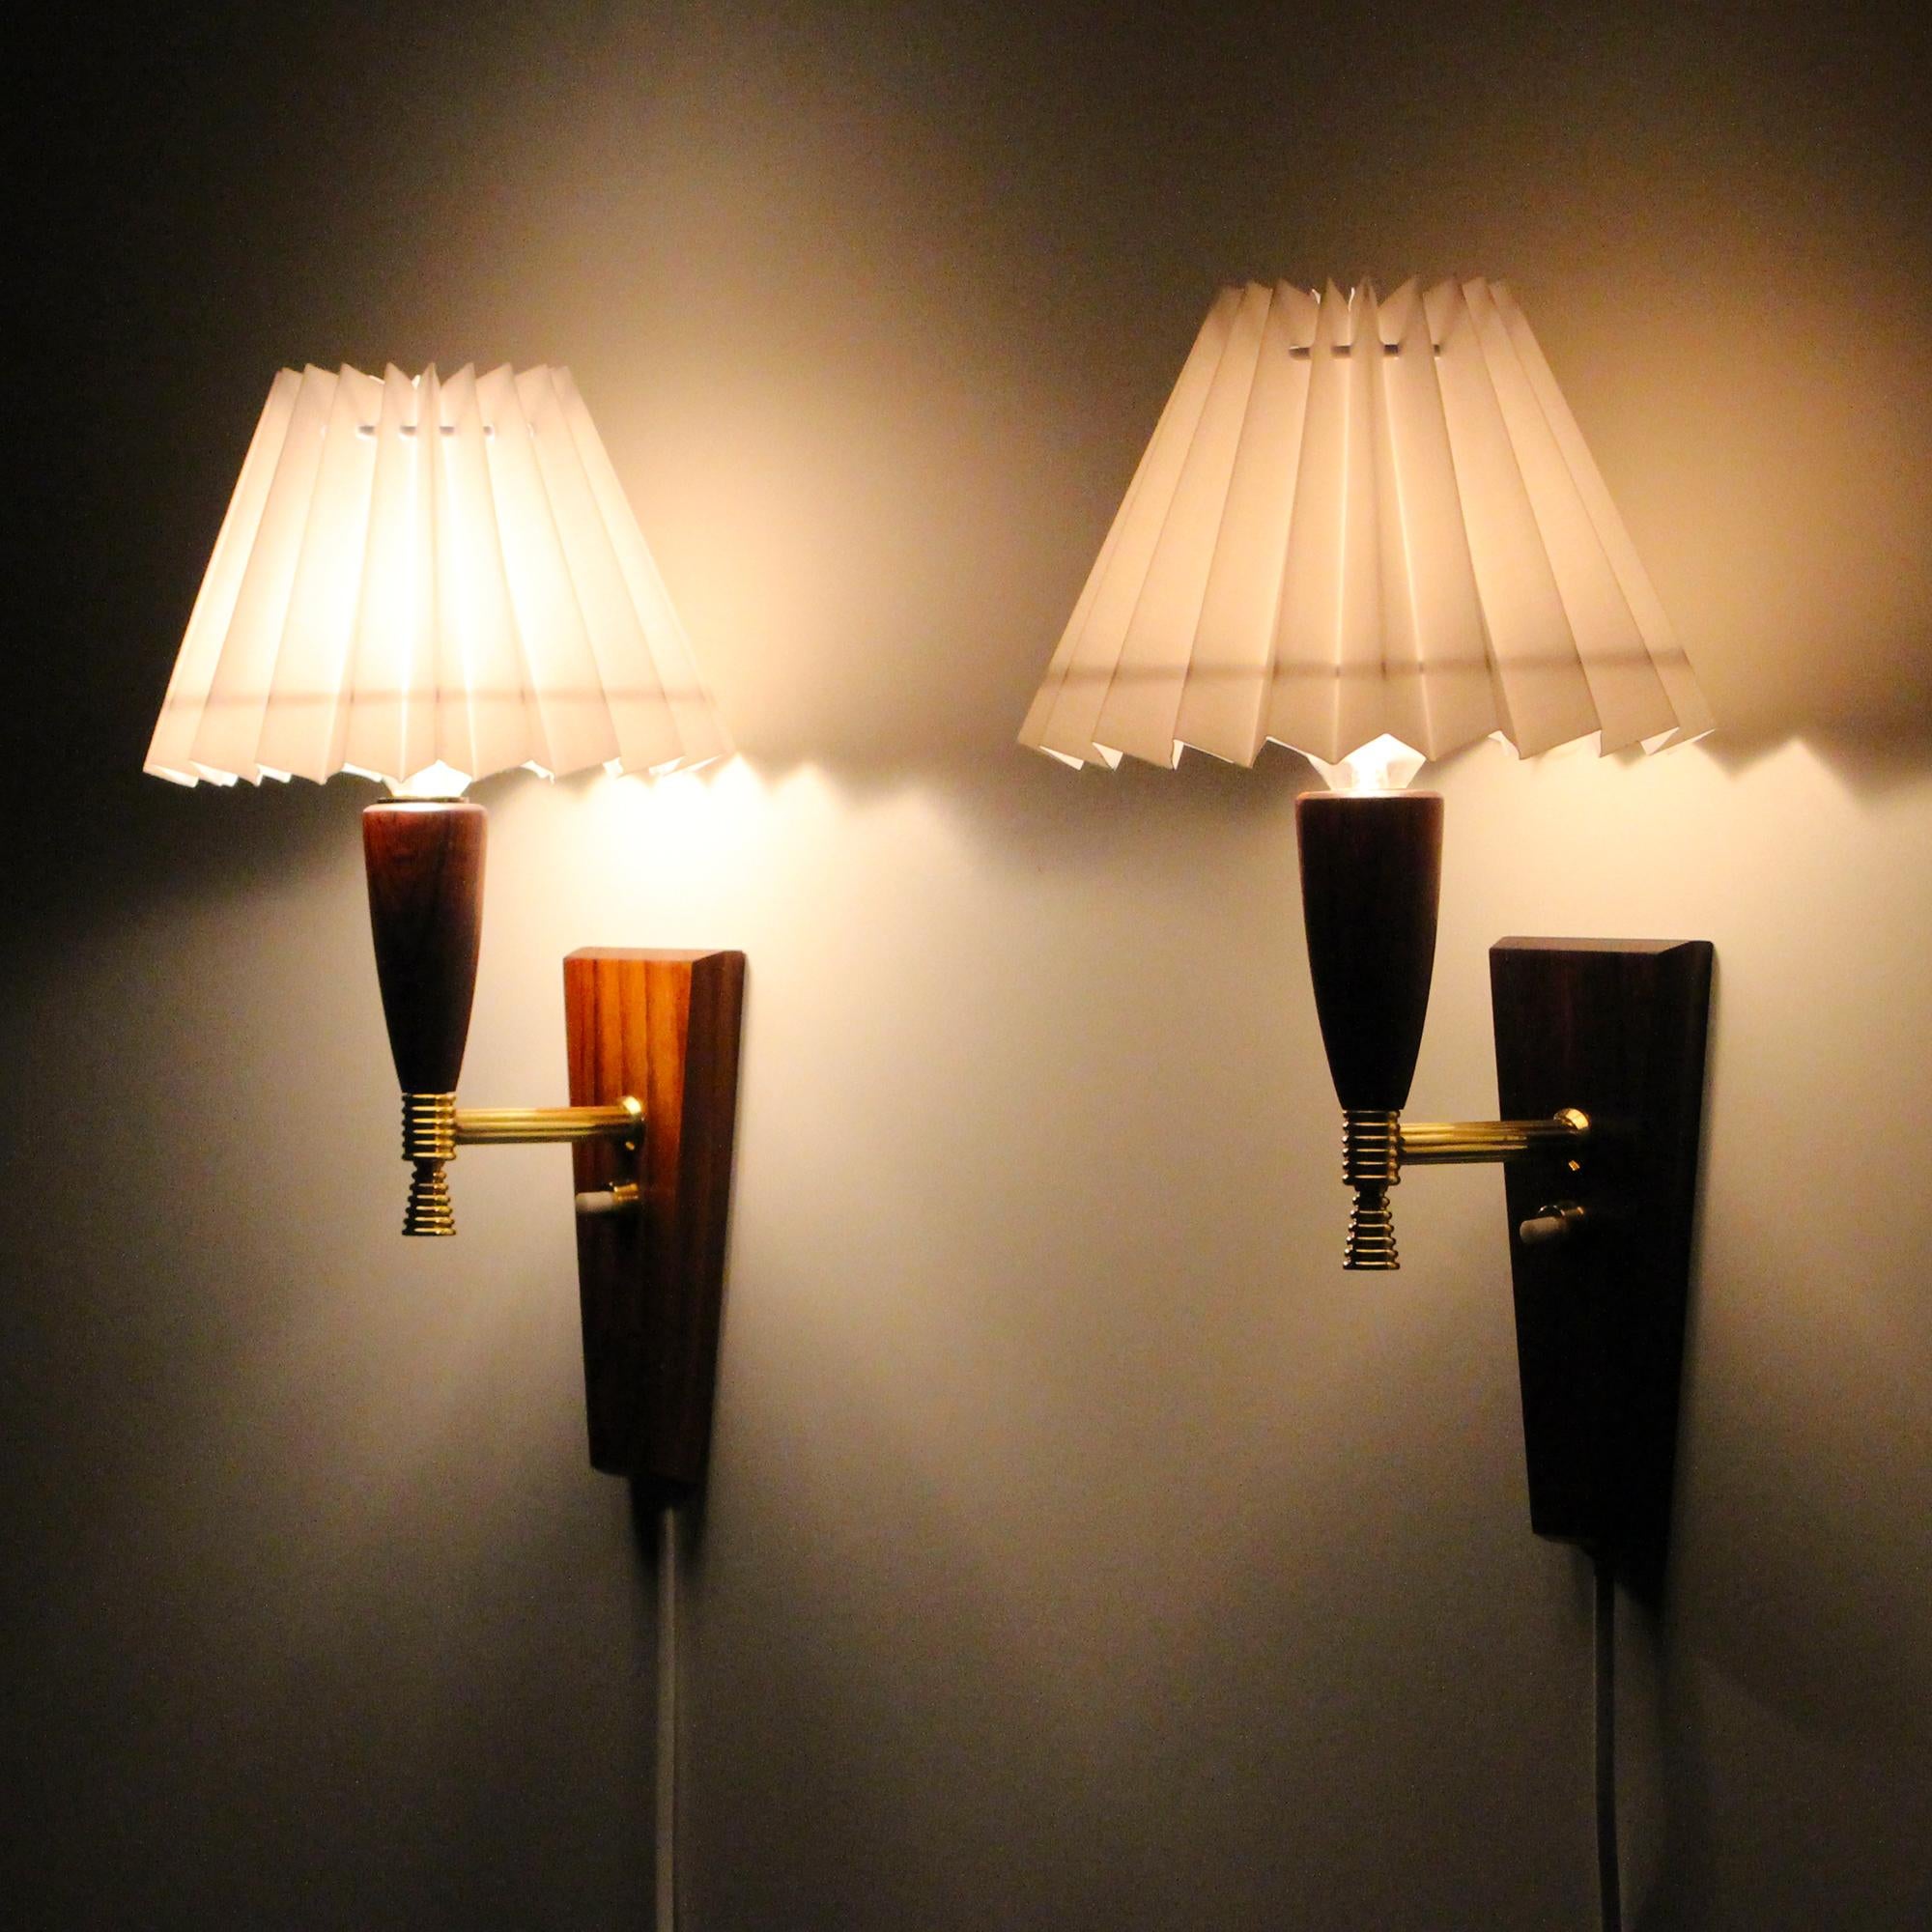 Oiled Teak Wall Lights 'Pair' by Laoni Belysning, 1960s Danish Midcentury Wall Lamps